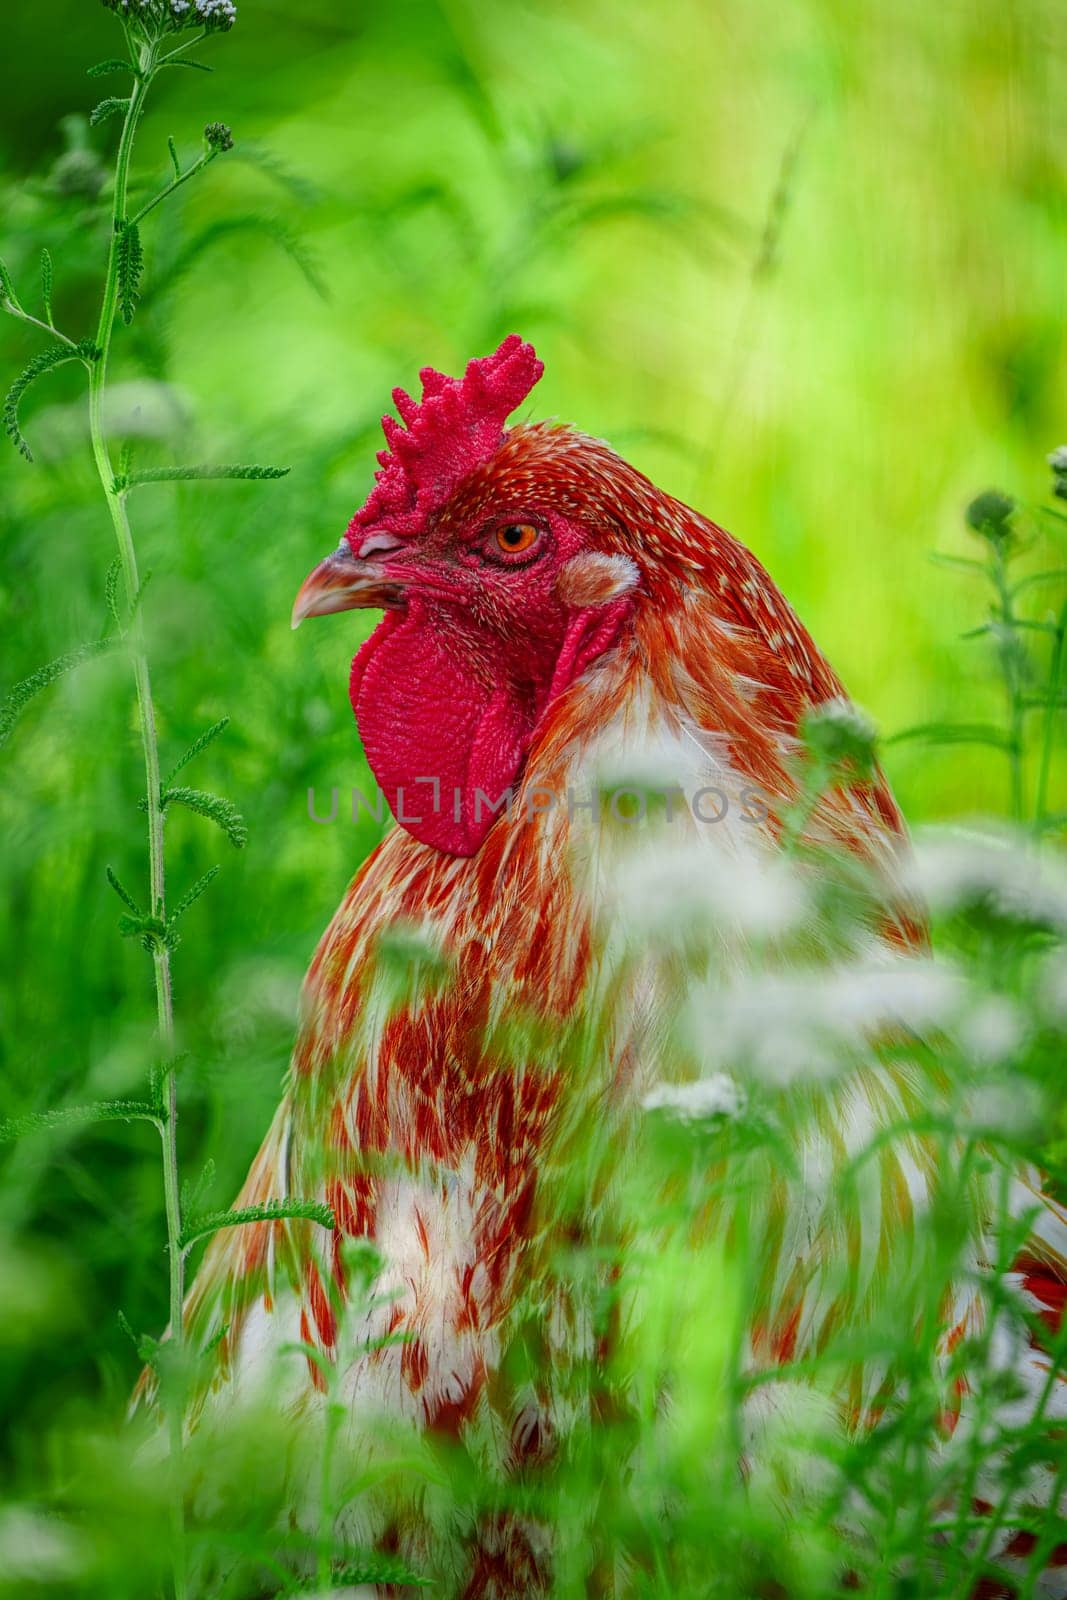 A magnificent rooster with a radiant, colorful plumage standing proudly in a lush green country pasture on a warm and sunny day, exuding confidence and vitality